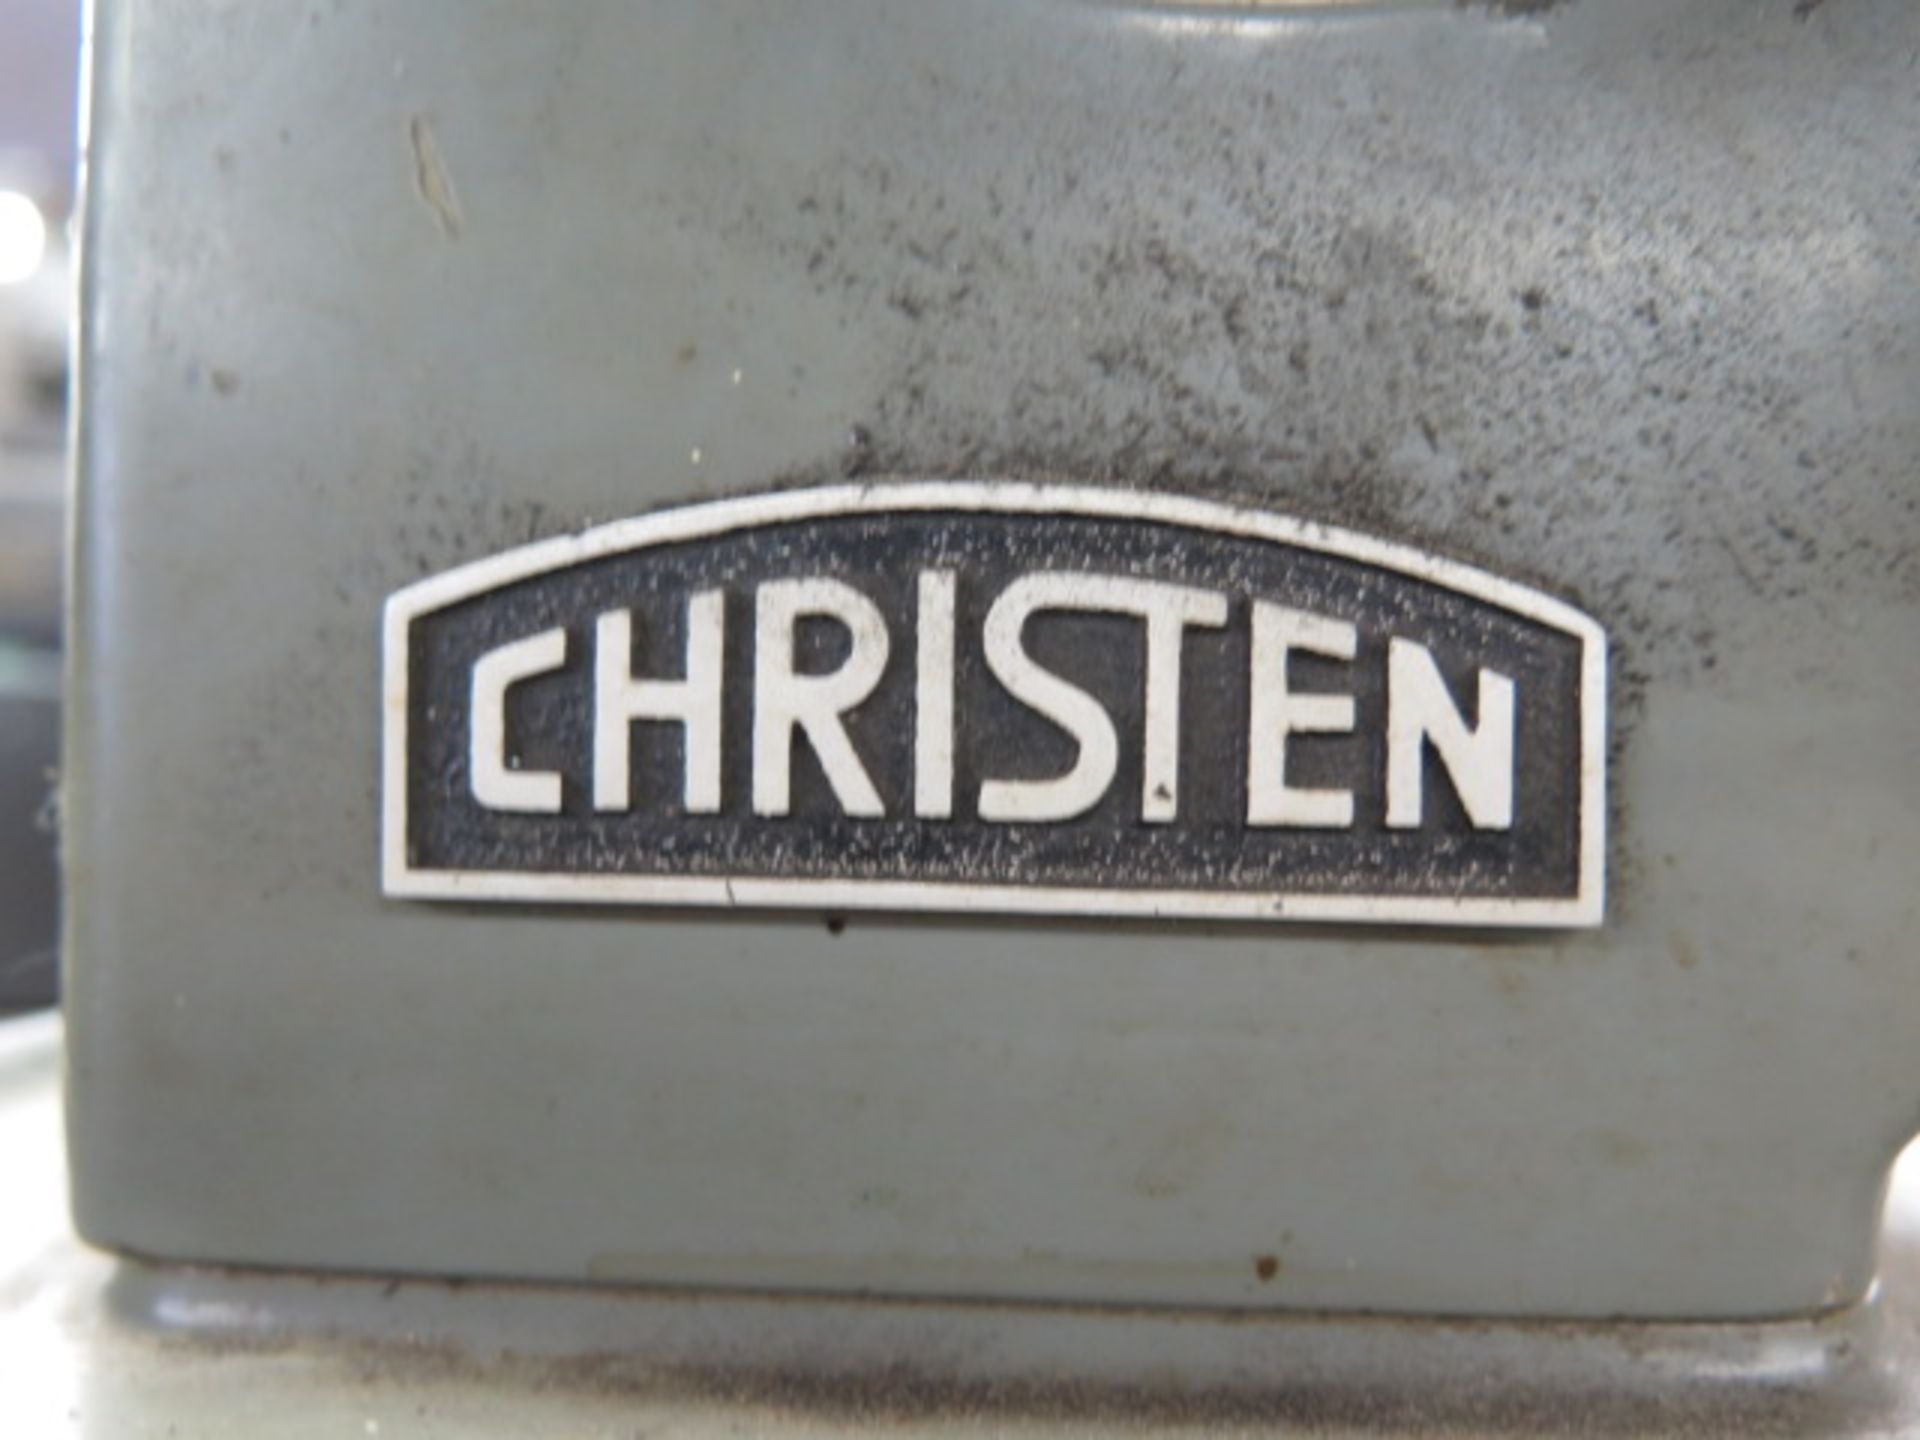 Christen Type LC21CH Precision Small Drill Sharpener s/n 340830 - Image 3 of 3